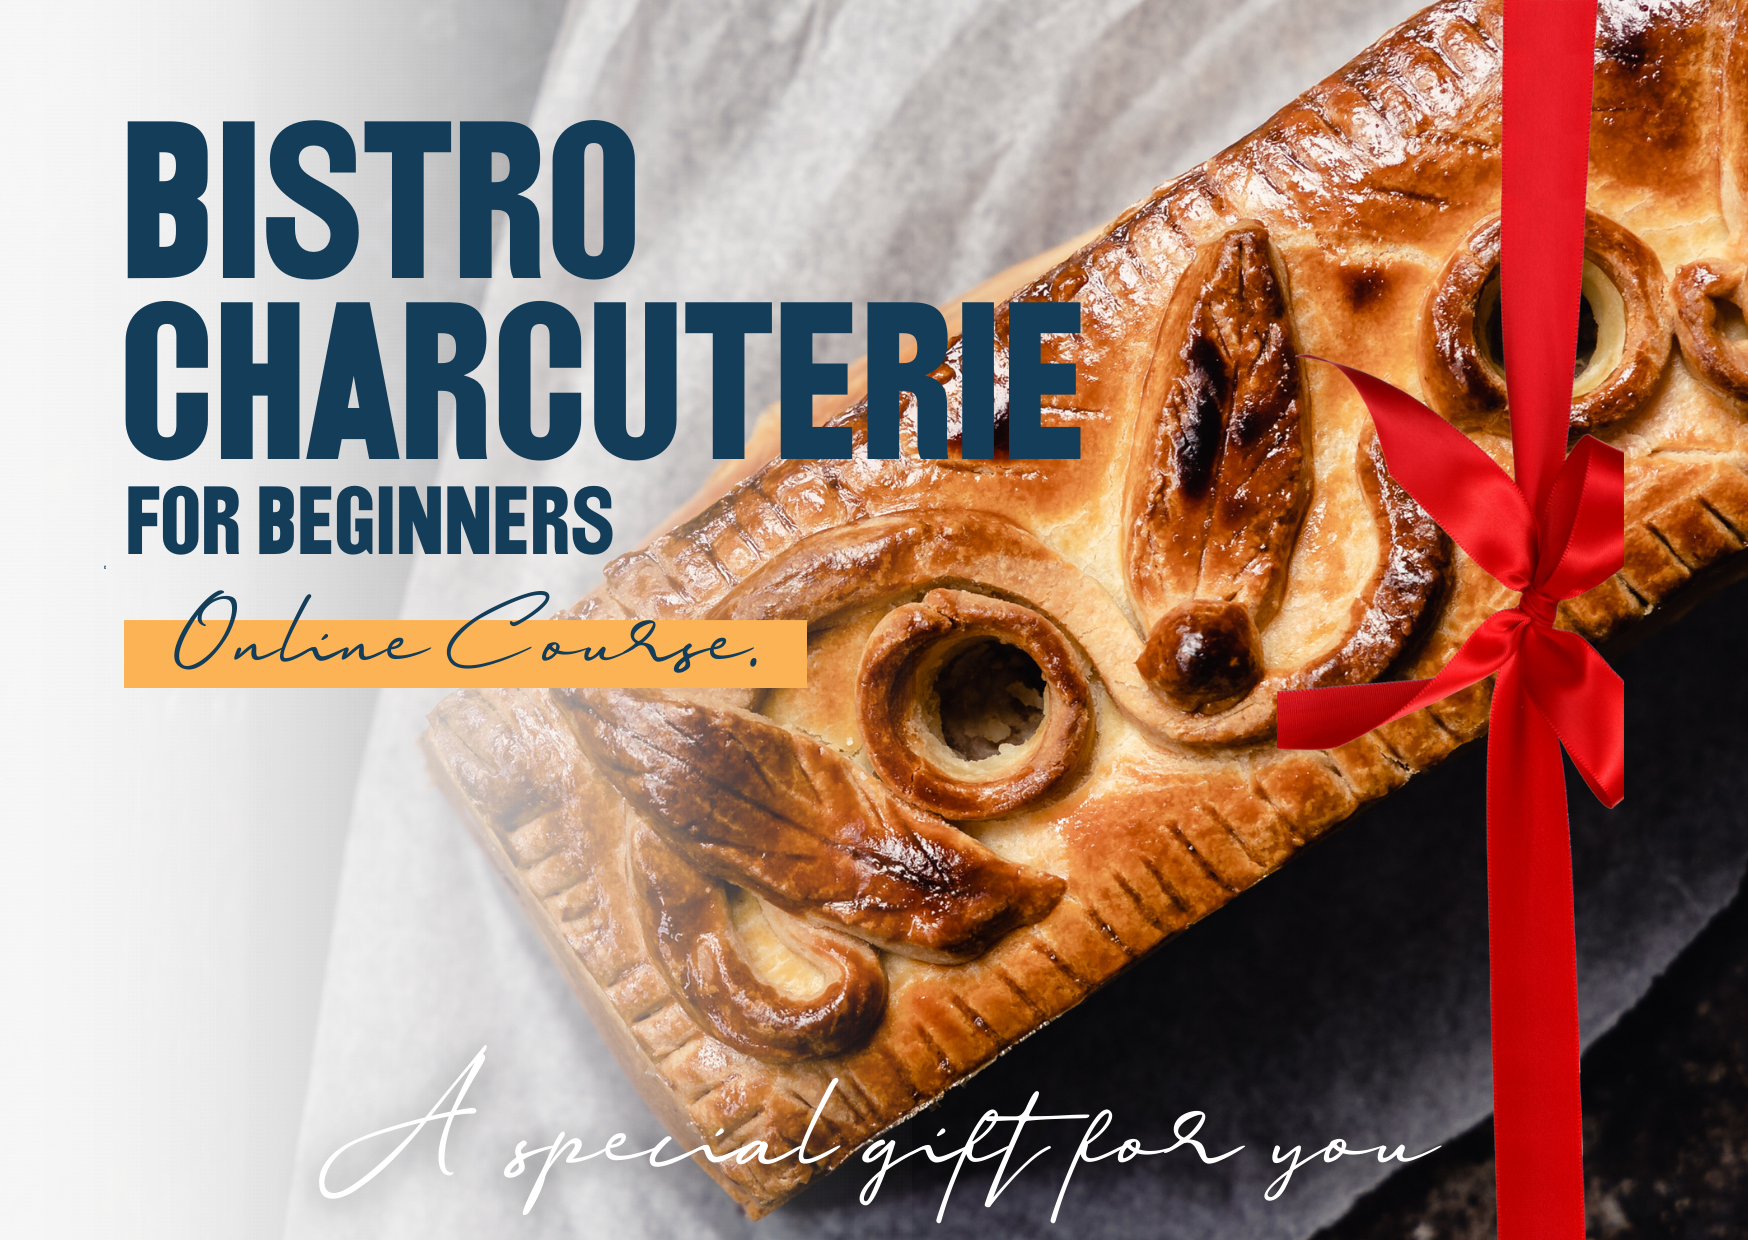 bistrot charcuterie online course gift card